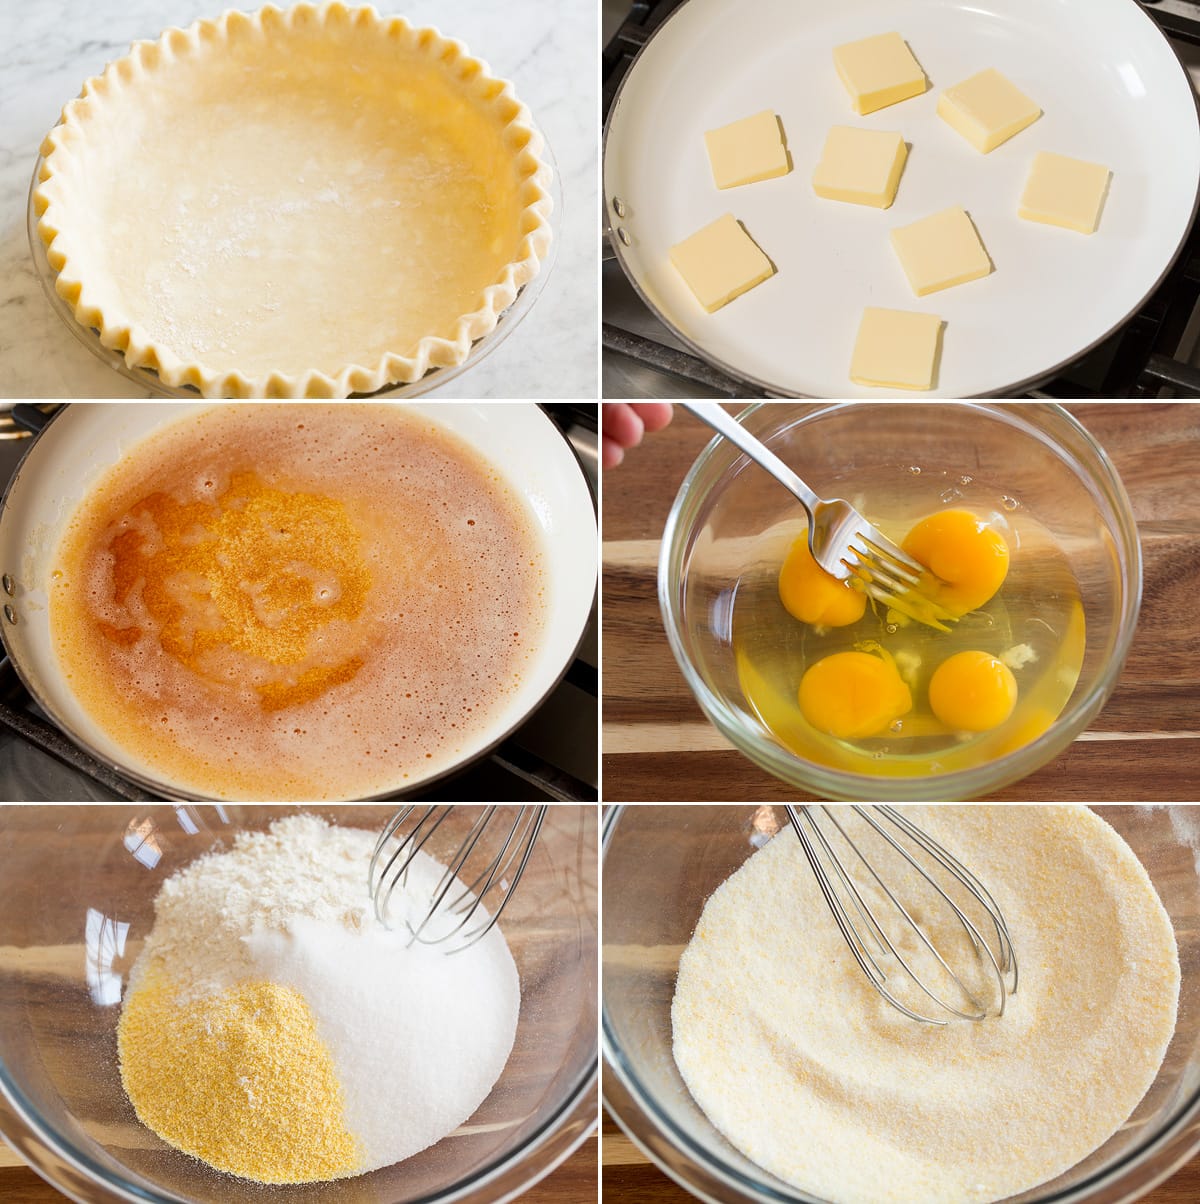 Collage of six images showing steps of making chess pie. Includes shaping pie crust in pie dish, browning butter in skillet, whisking eggs in bowl, and mixing flour, cornmeal and sugar in separate bowl. 